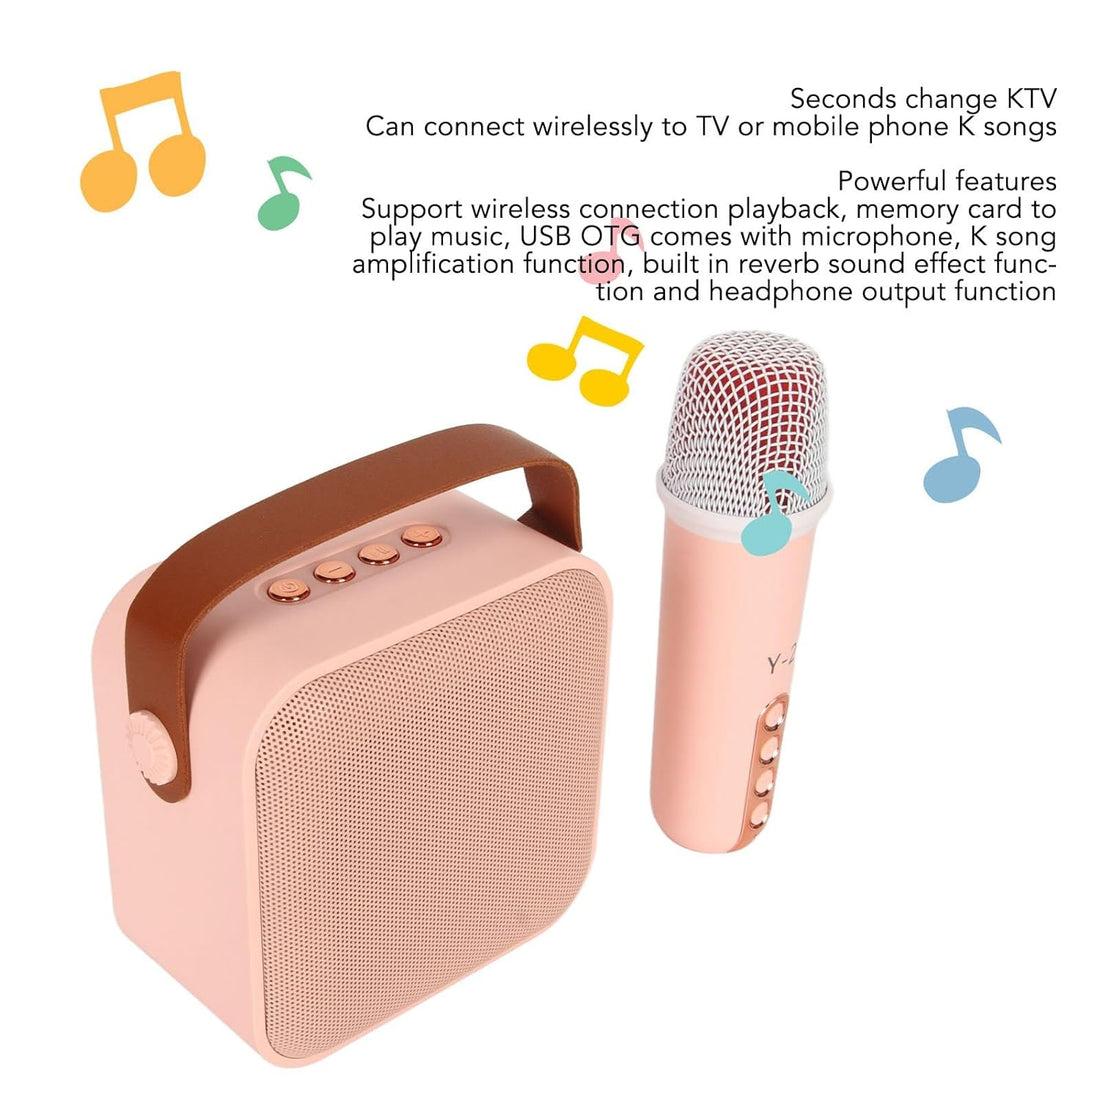 ASHATA Portable Speaker with Microphone Set, Mini Karaoke Machine Set, Portable Speaker with 1 Wireless Microphone for Home Party KTV (Pink)